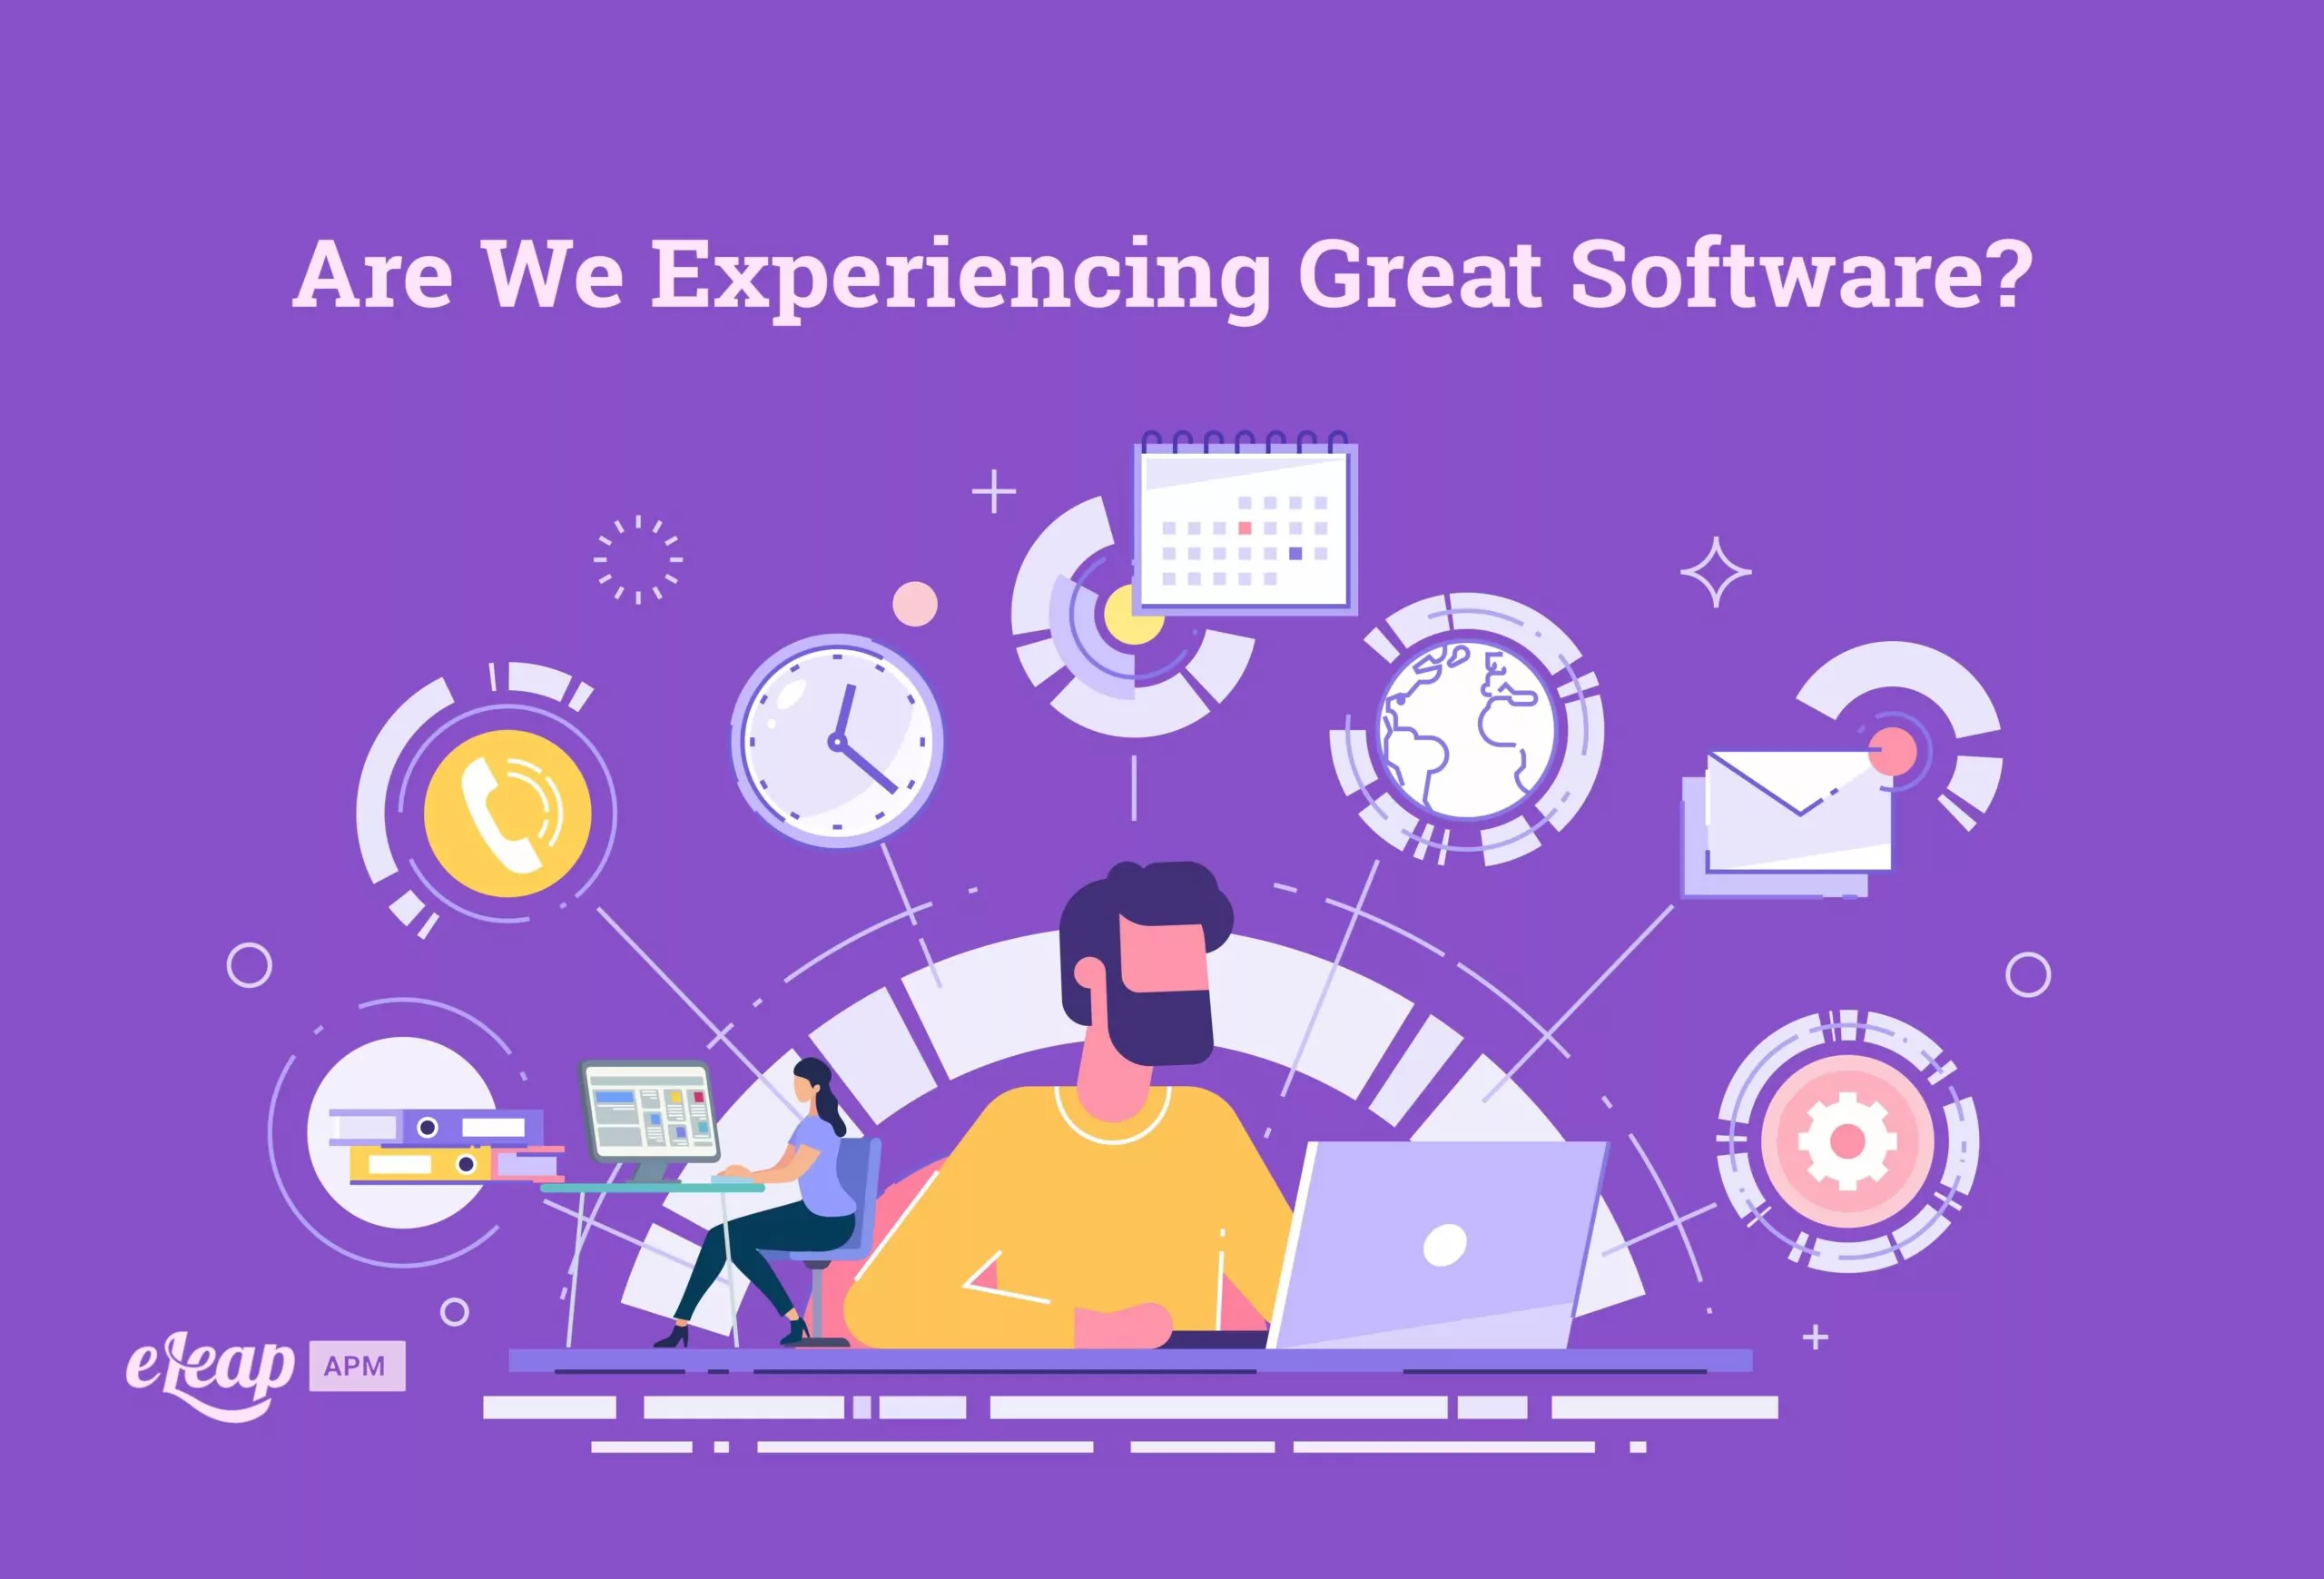 Are We Experiencing Great Software?